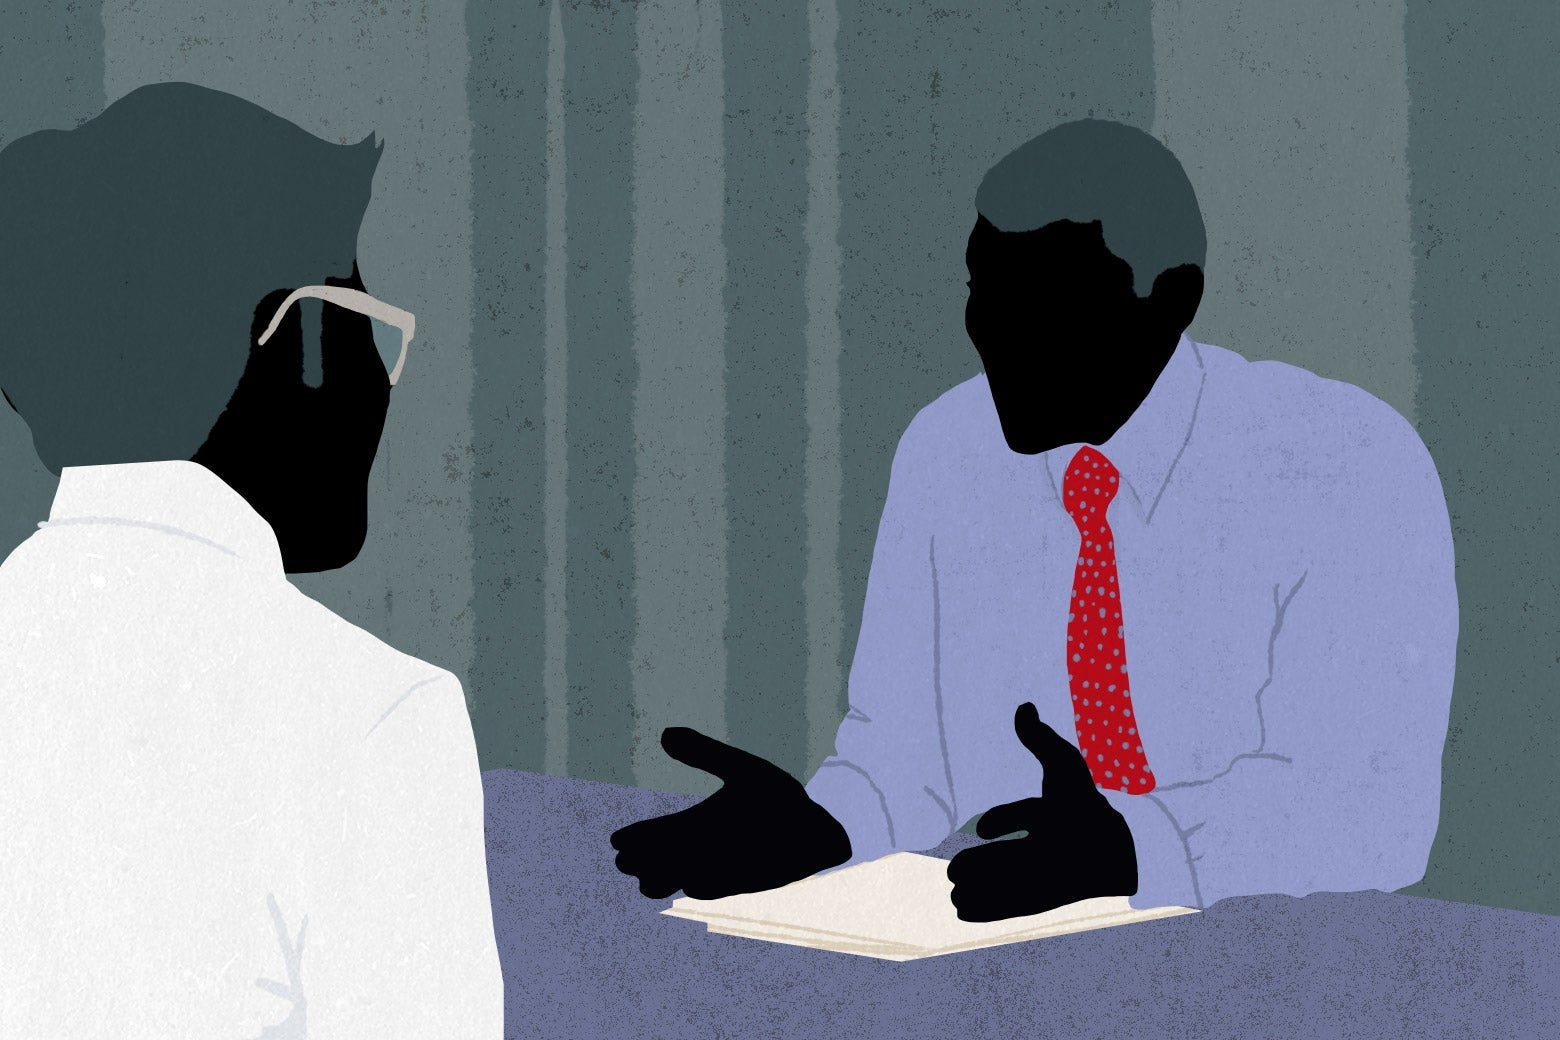 An illustration of a man interviewing another man.